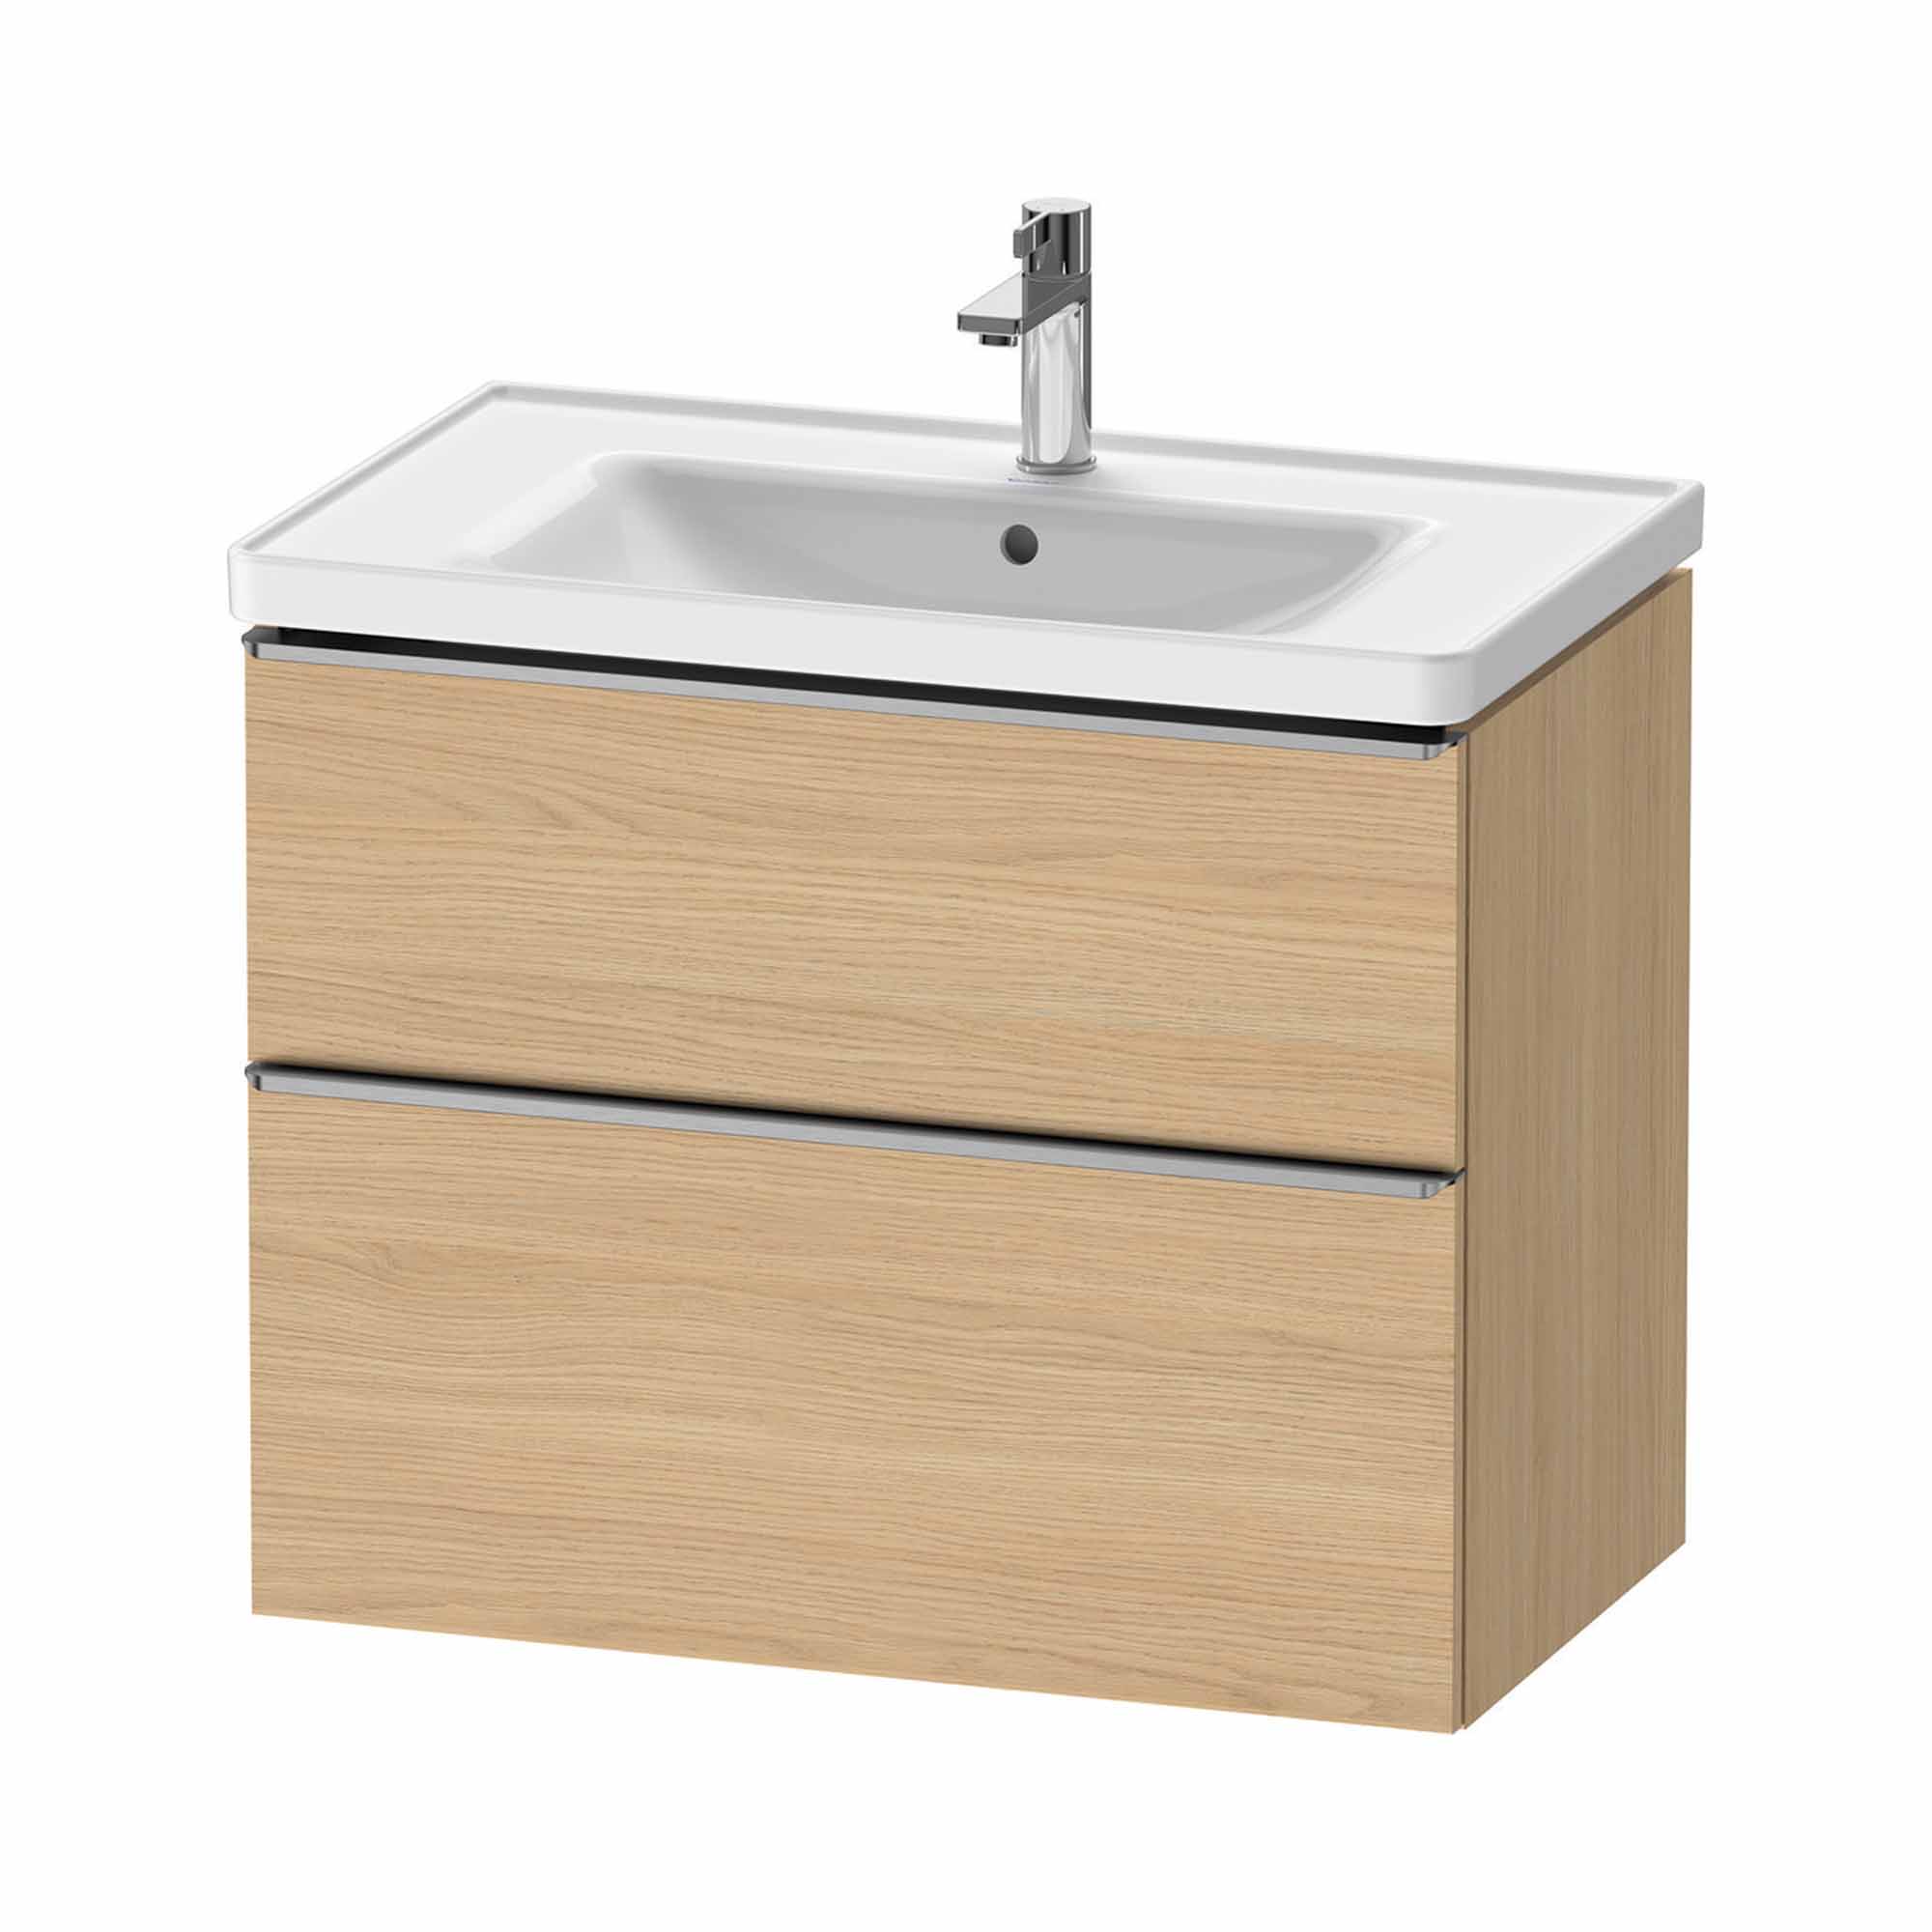 duravit d-neo 800mm wall mounted vanity unit with d-neo basin natural oak stainless steel handles